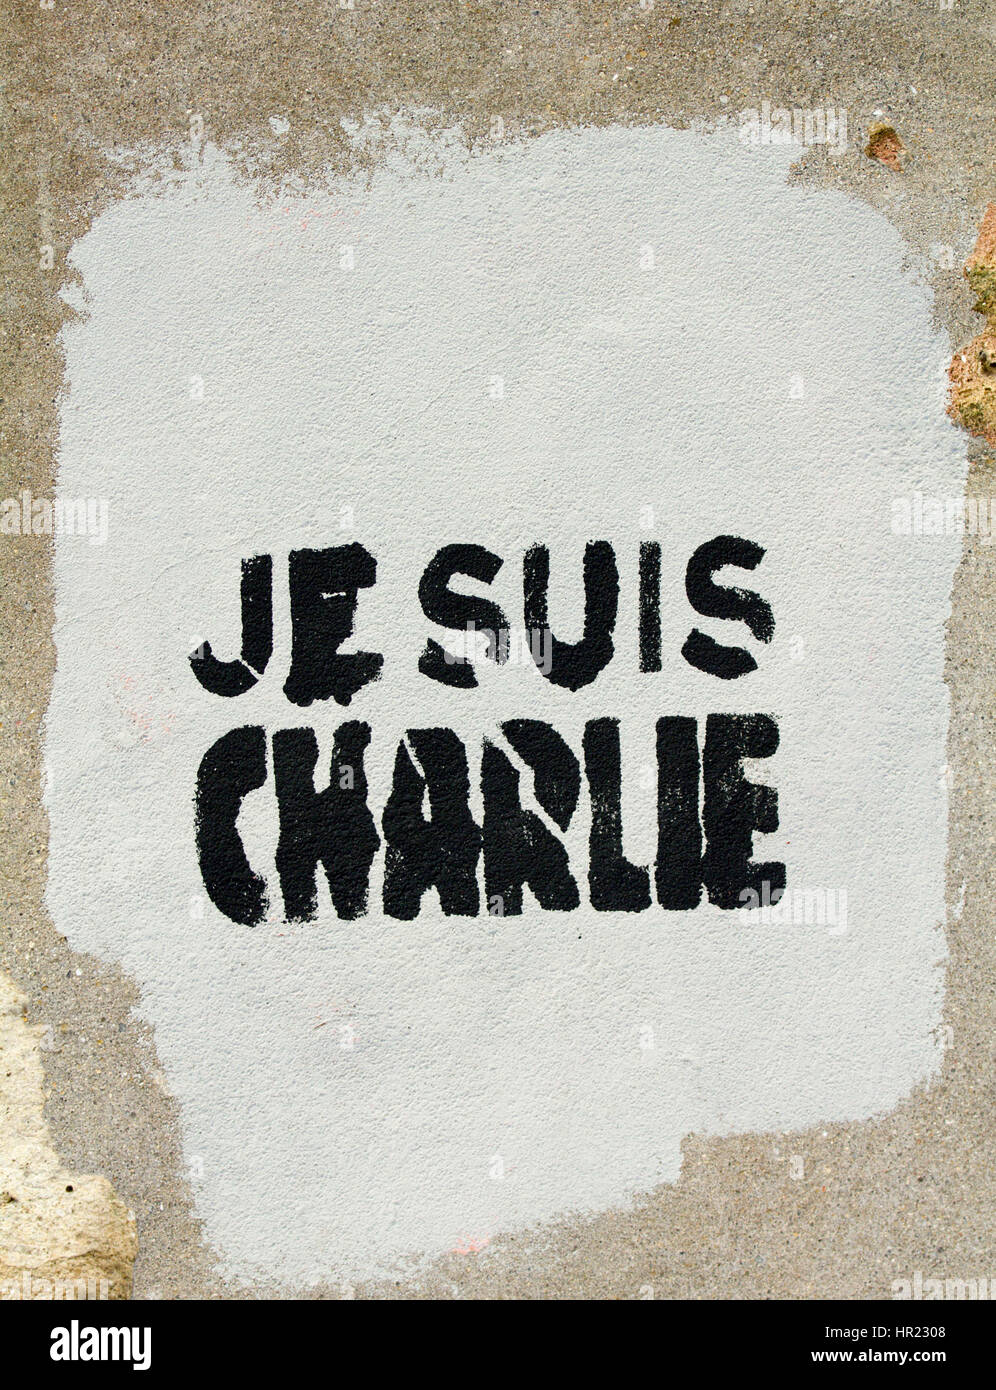 Je Suis Charlie stencil graffito remembering those killed on 07/01/2015 in Paris terror attack on Charlie Hebdo Stock Photo